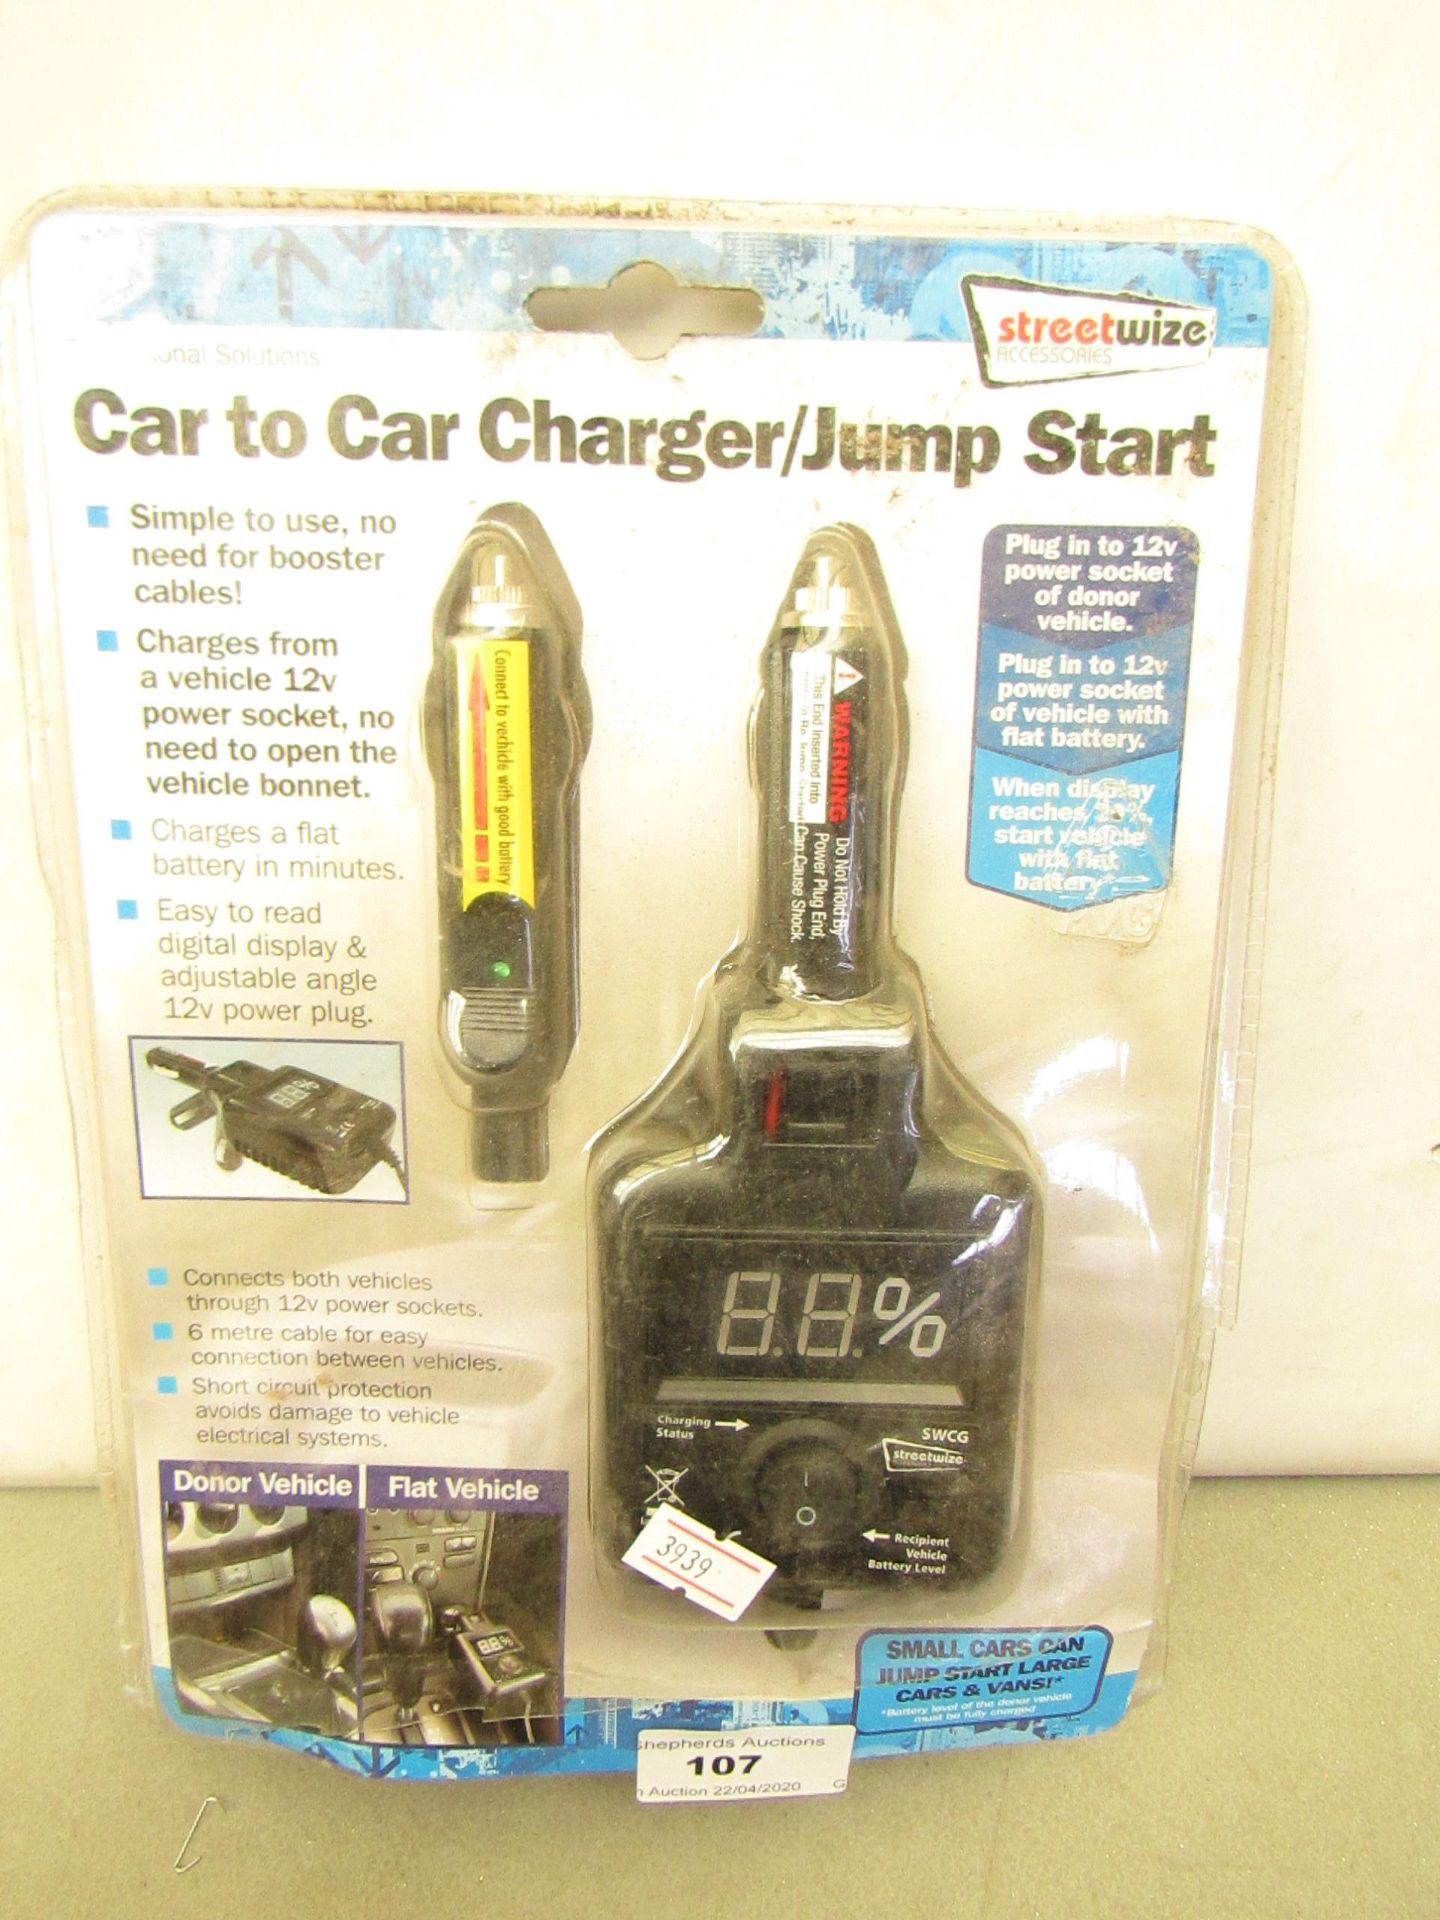 Streetwize car to car charger / jump starter, untested and packaged.